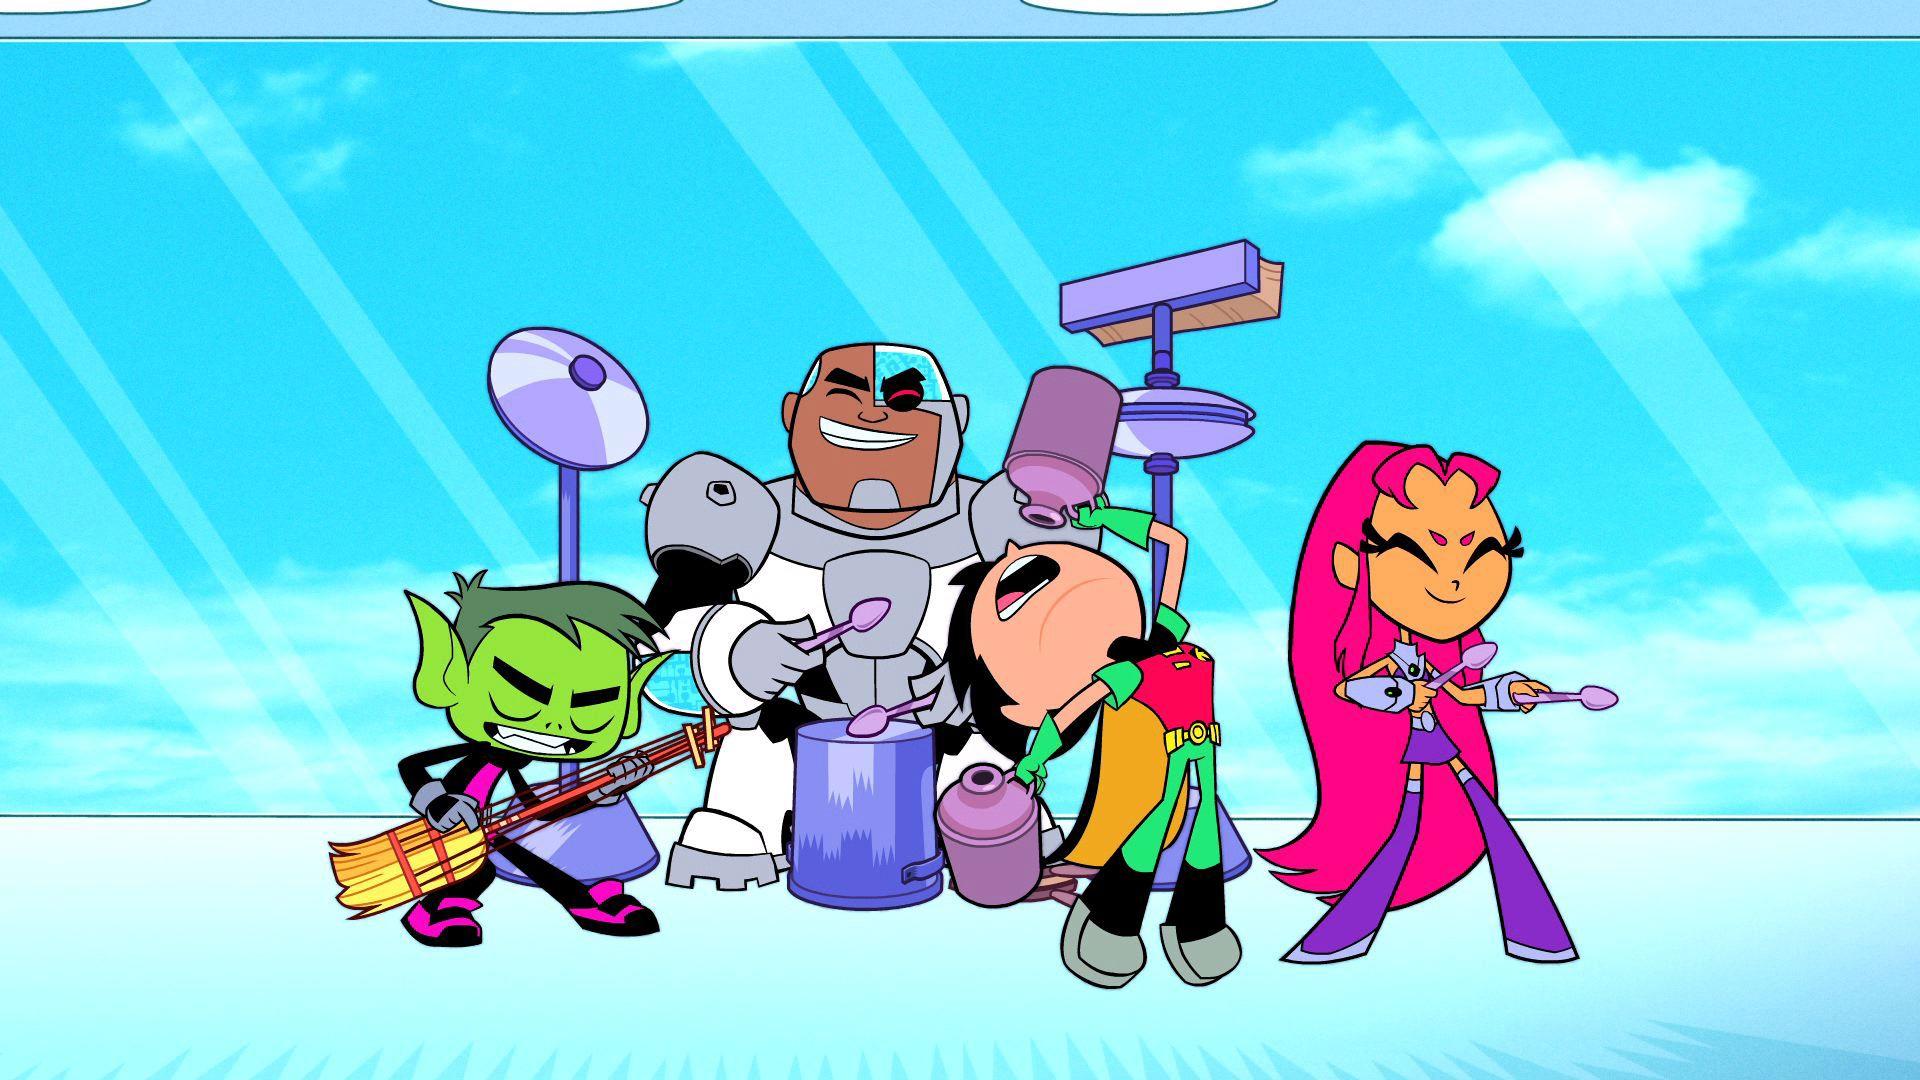 Wallpaper.wiki Free Teen Titans Go Background Download PIC WPE008935